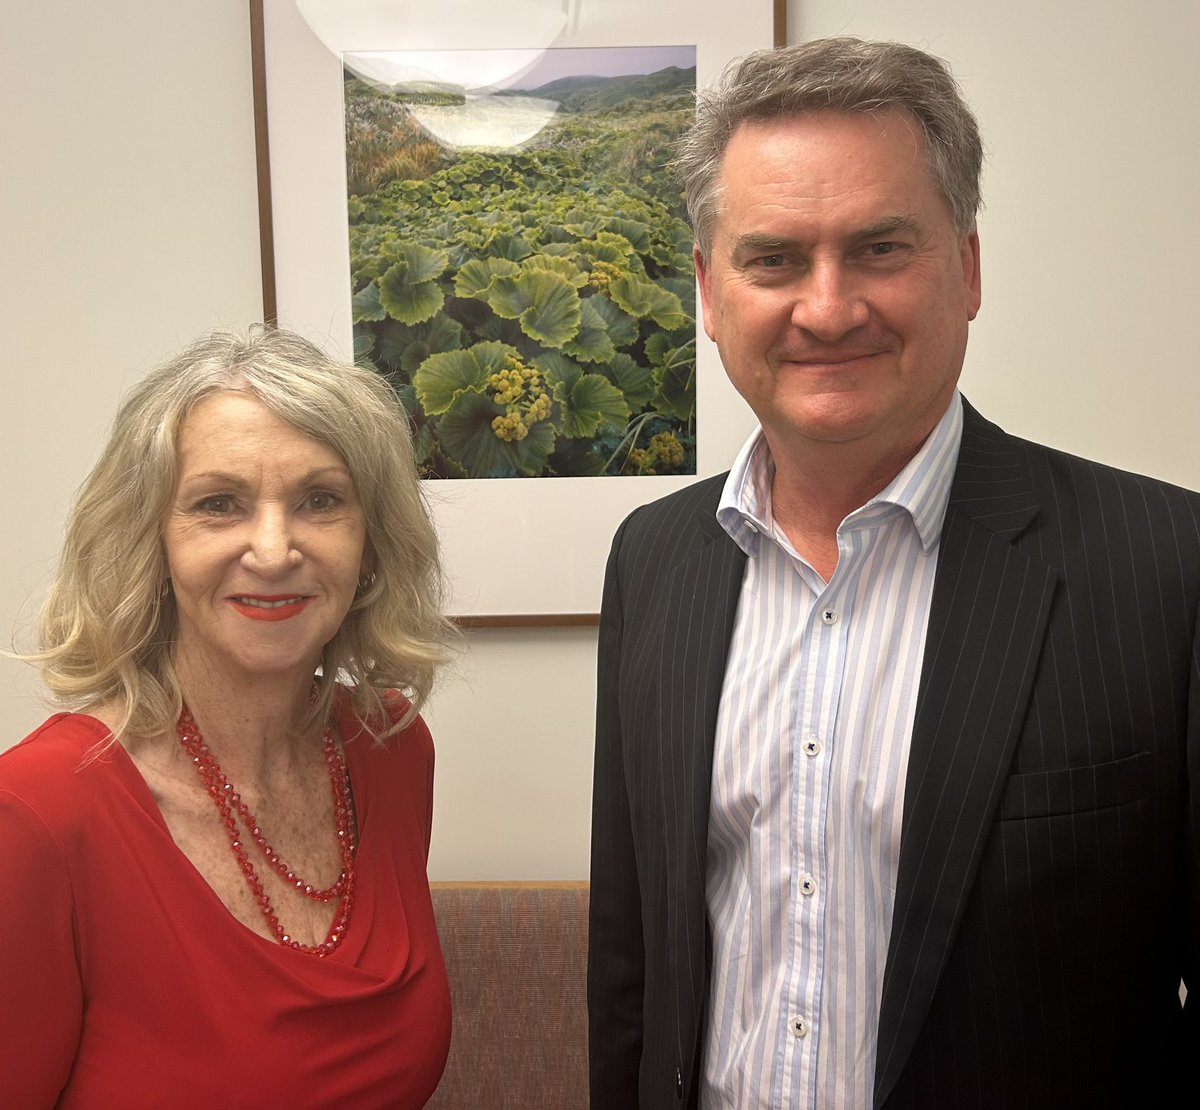 Helen Polley: Great to catch up with the CEO of Dietitians Australia Robert Hun…